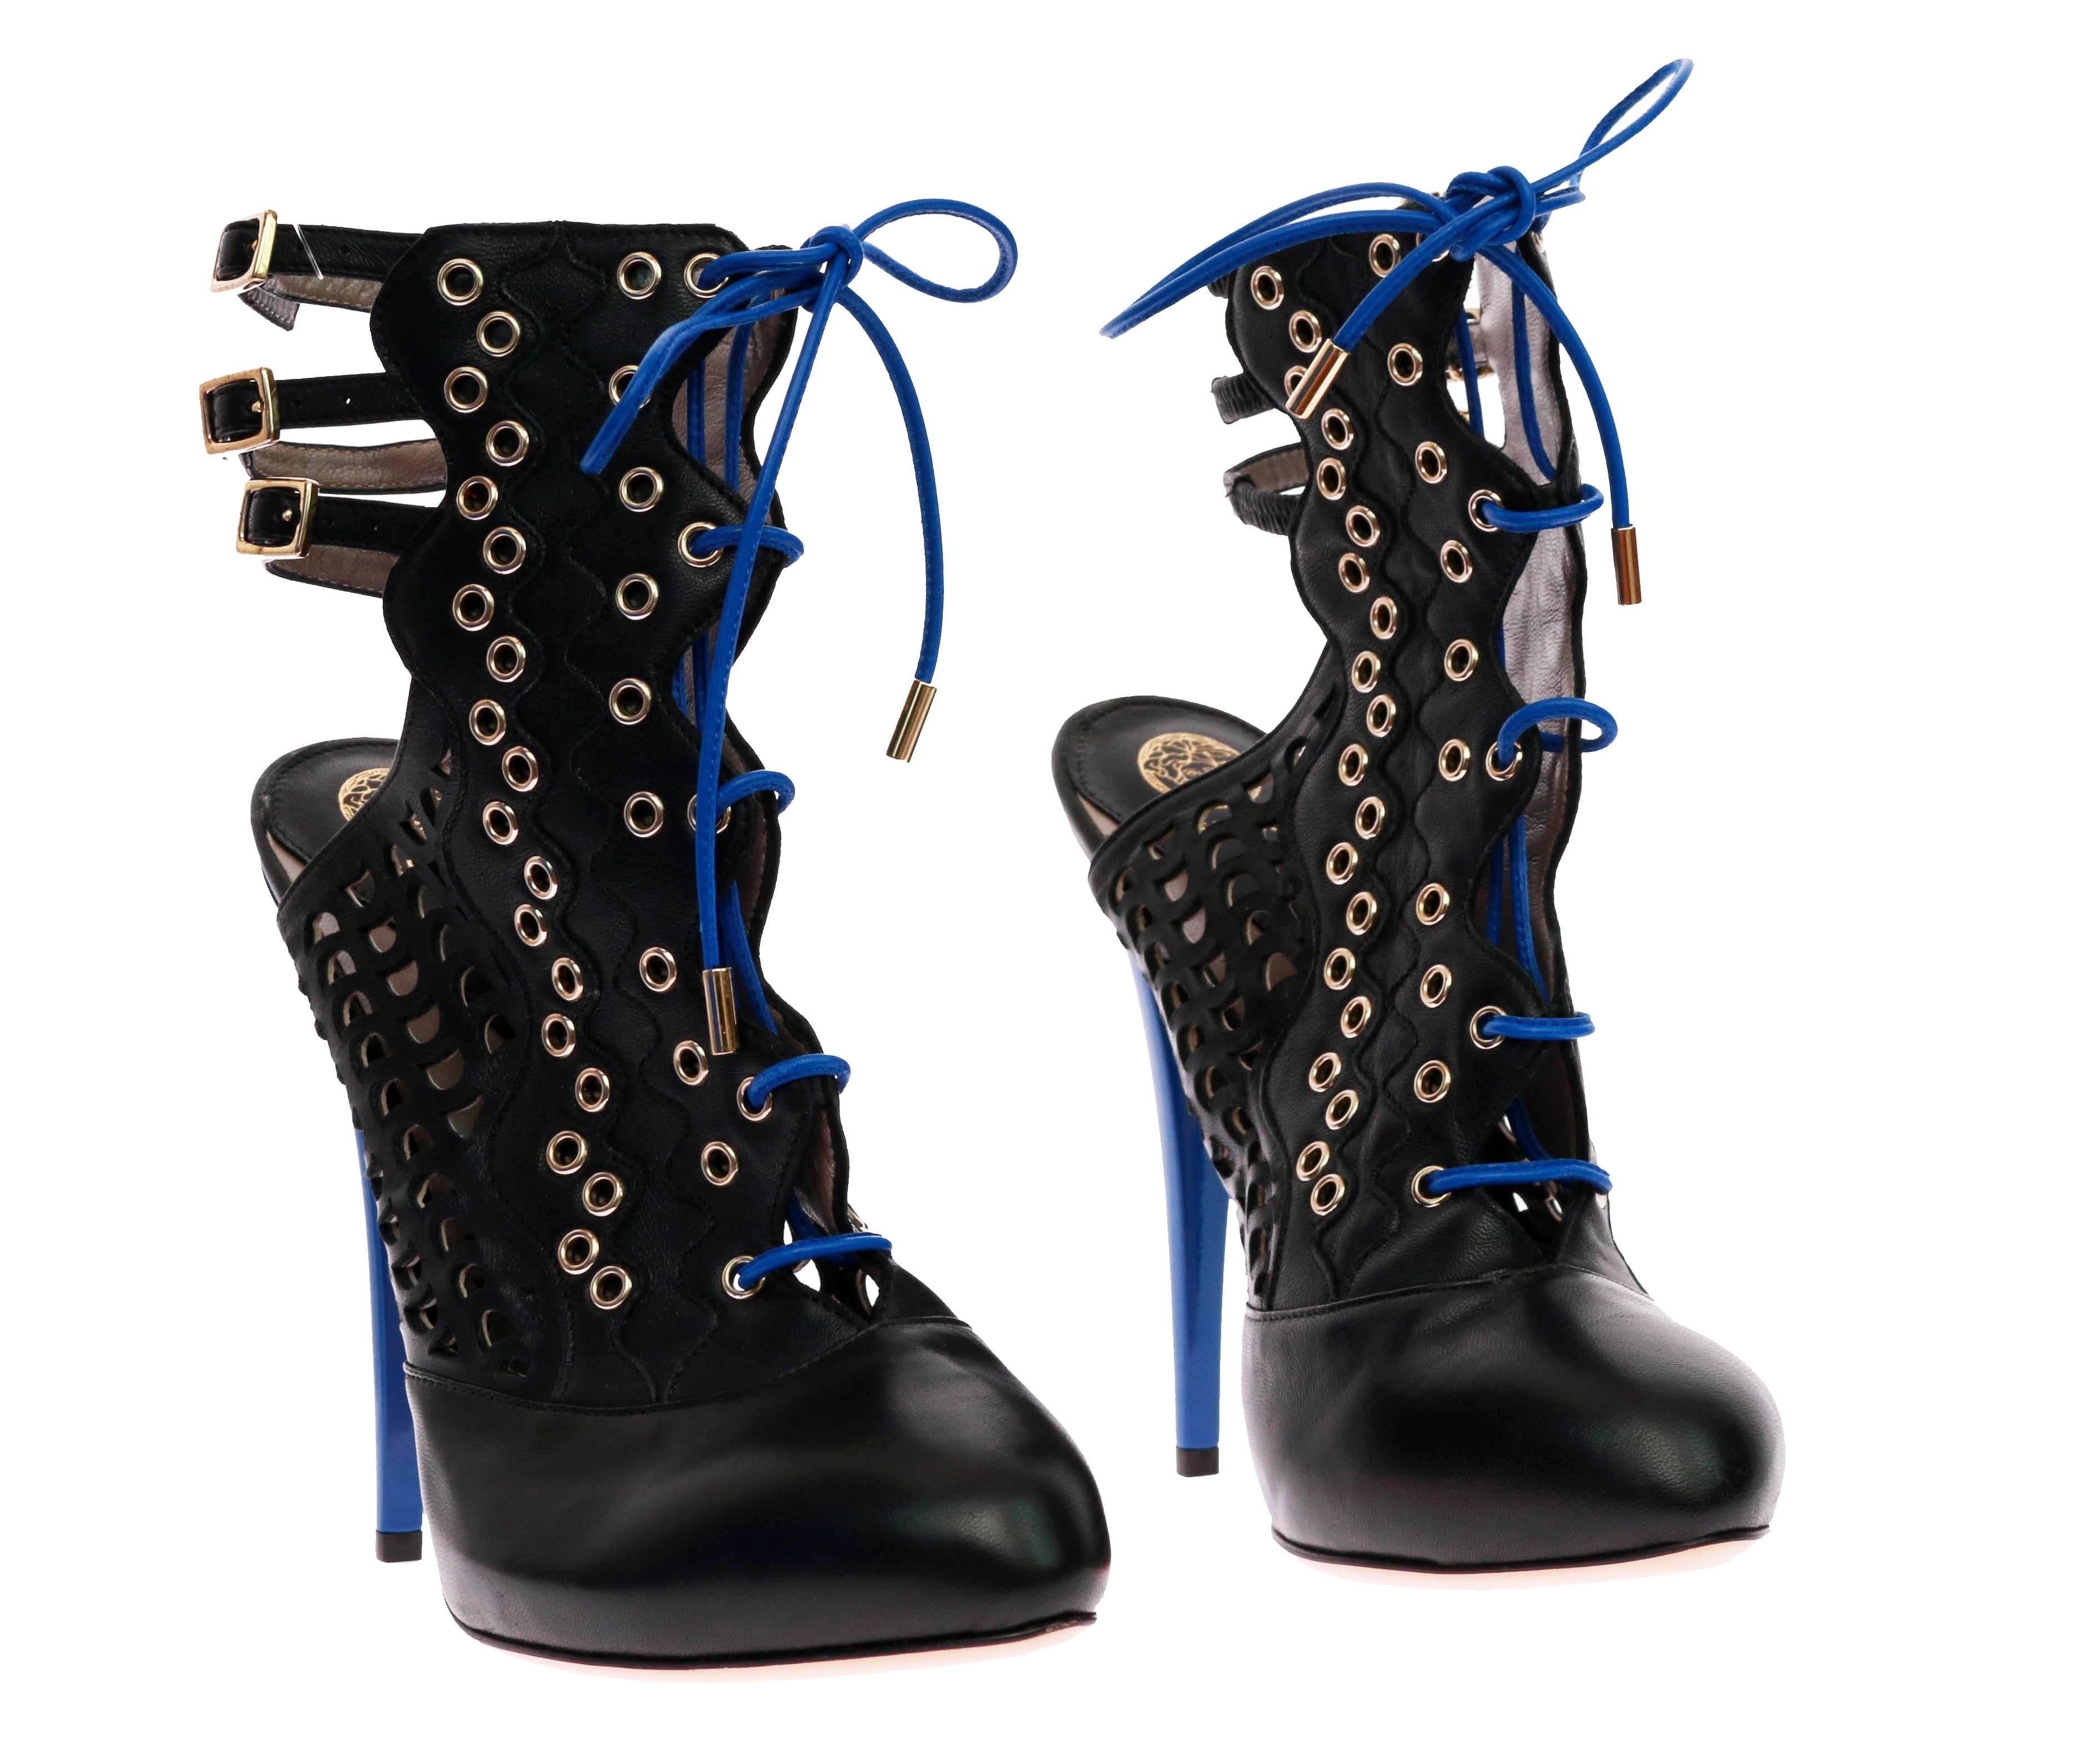 Resort 2012 look # 13 NEW VERSACE BLACK PERFORATED LEATHER ANKLE BOOTS 39 - 9 For Sale 1